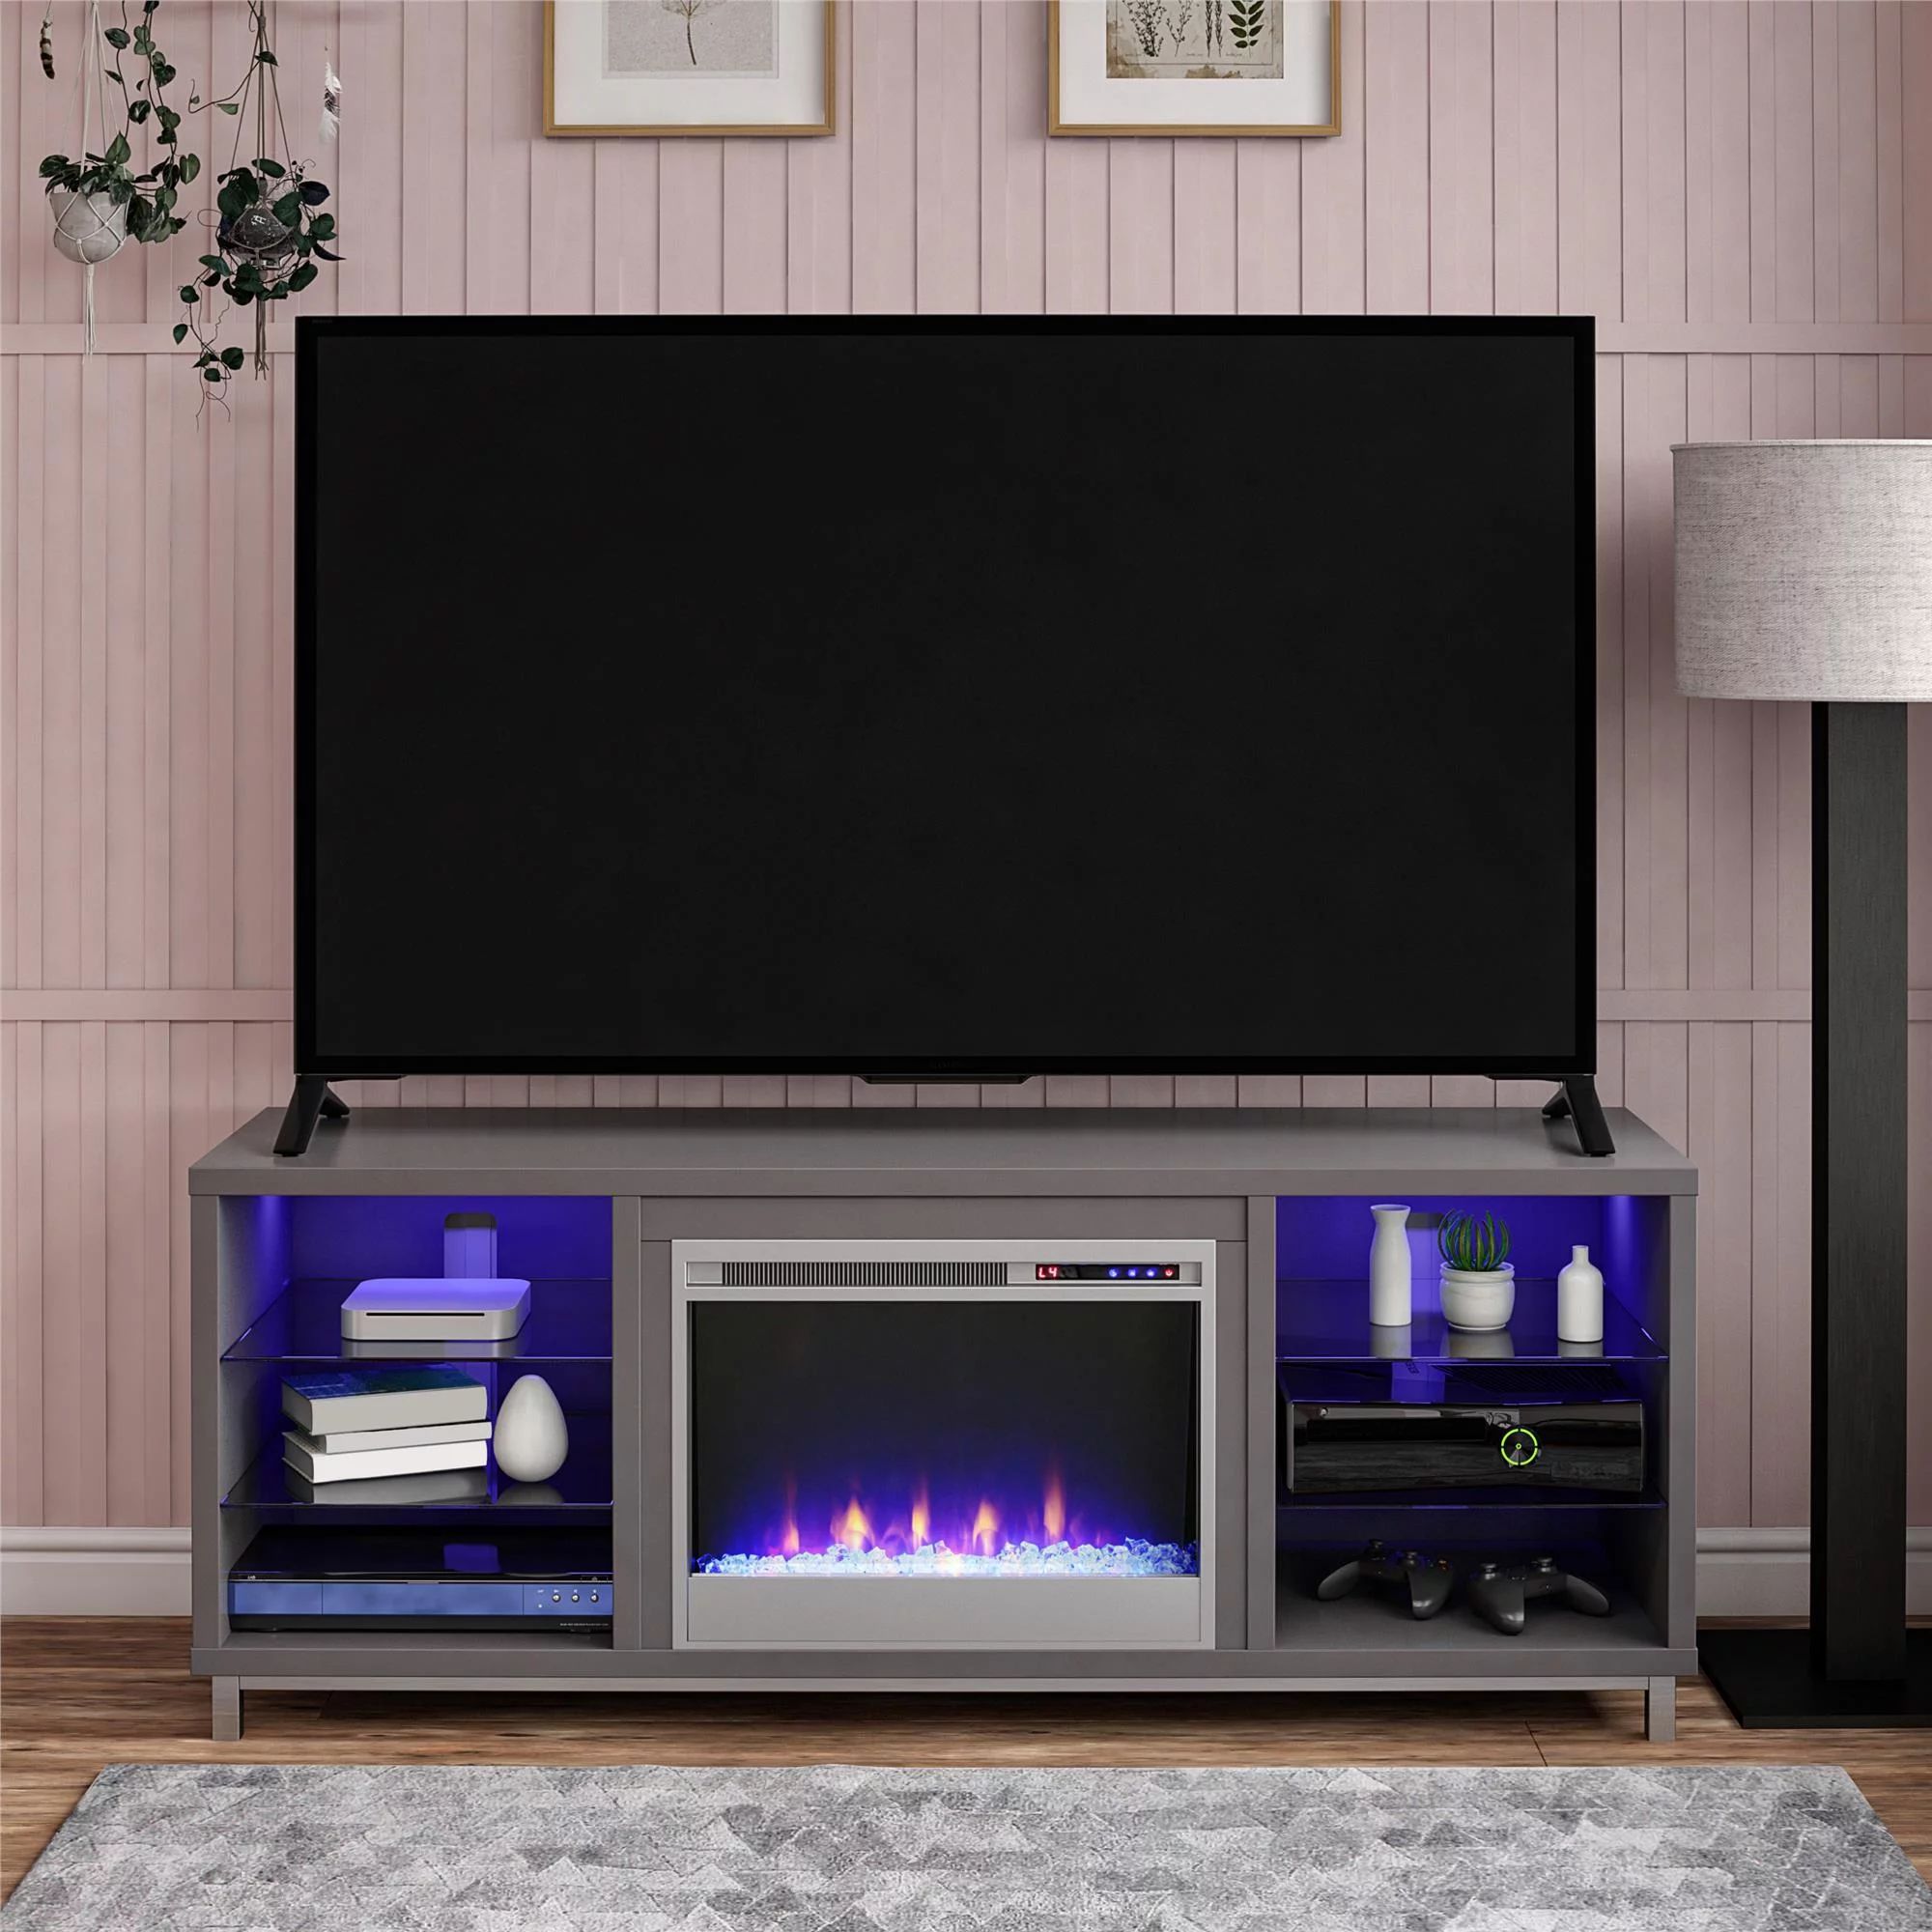 Ameriwood Lumina Fireplace TV Stand for TVs up to 70" Wide, Multiple Colors | Walmart (US)